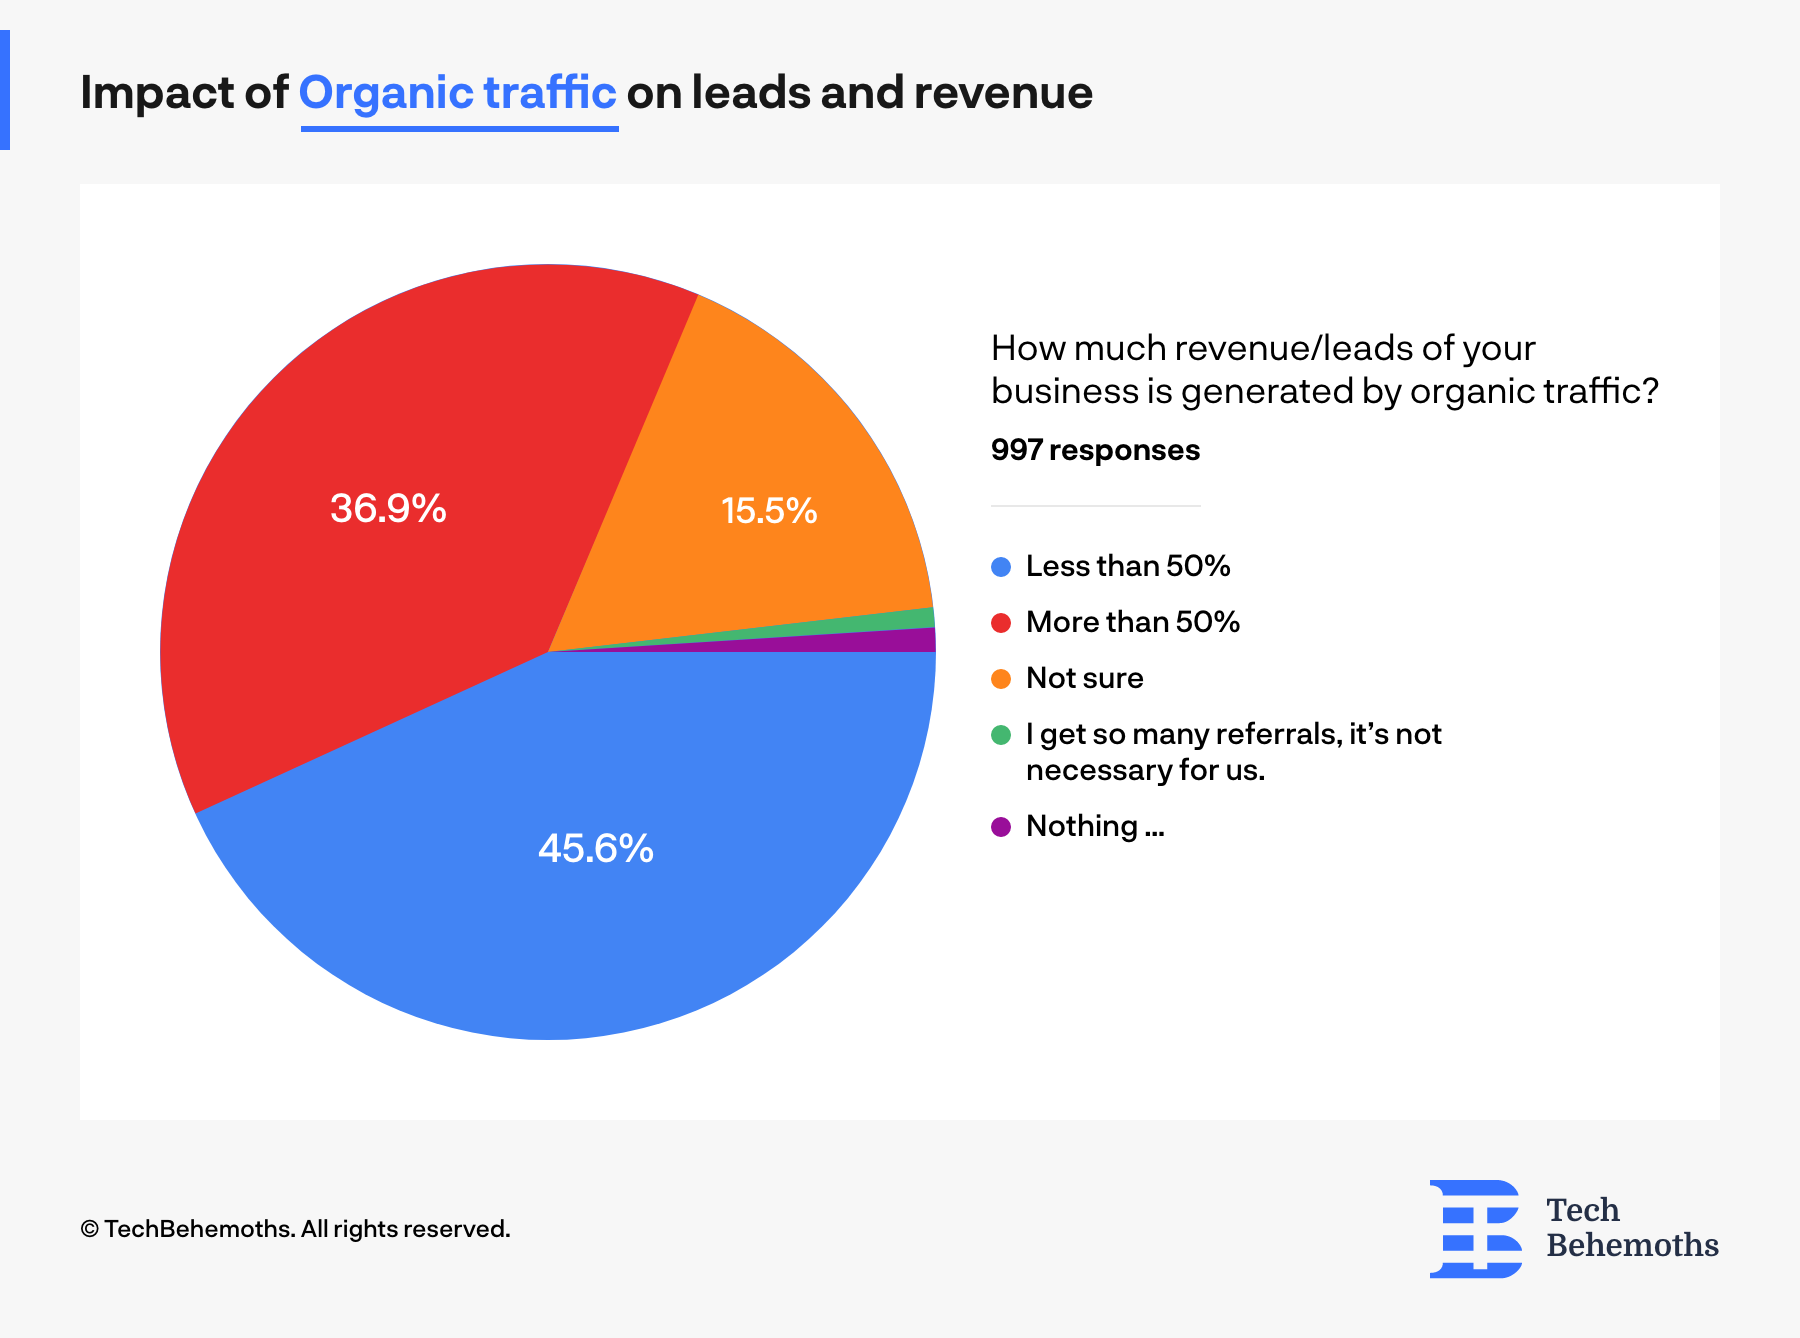 45.6% of it companies get less than half of their leads from organic sources